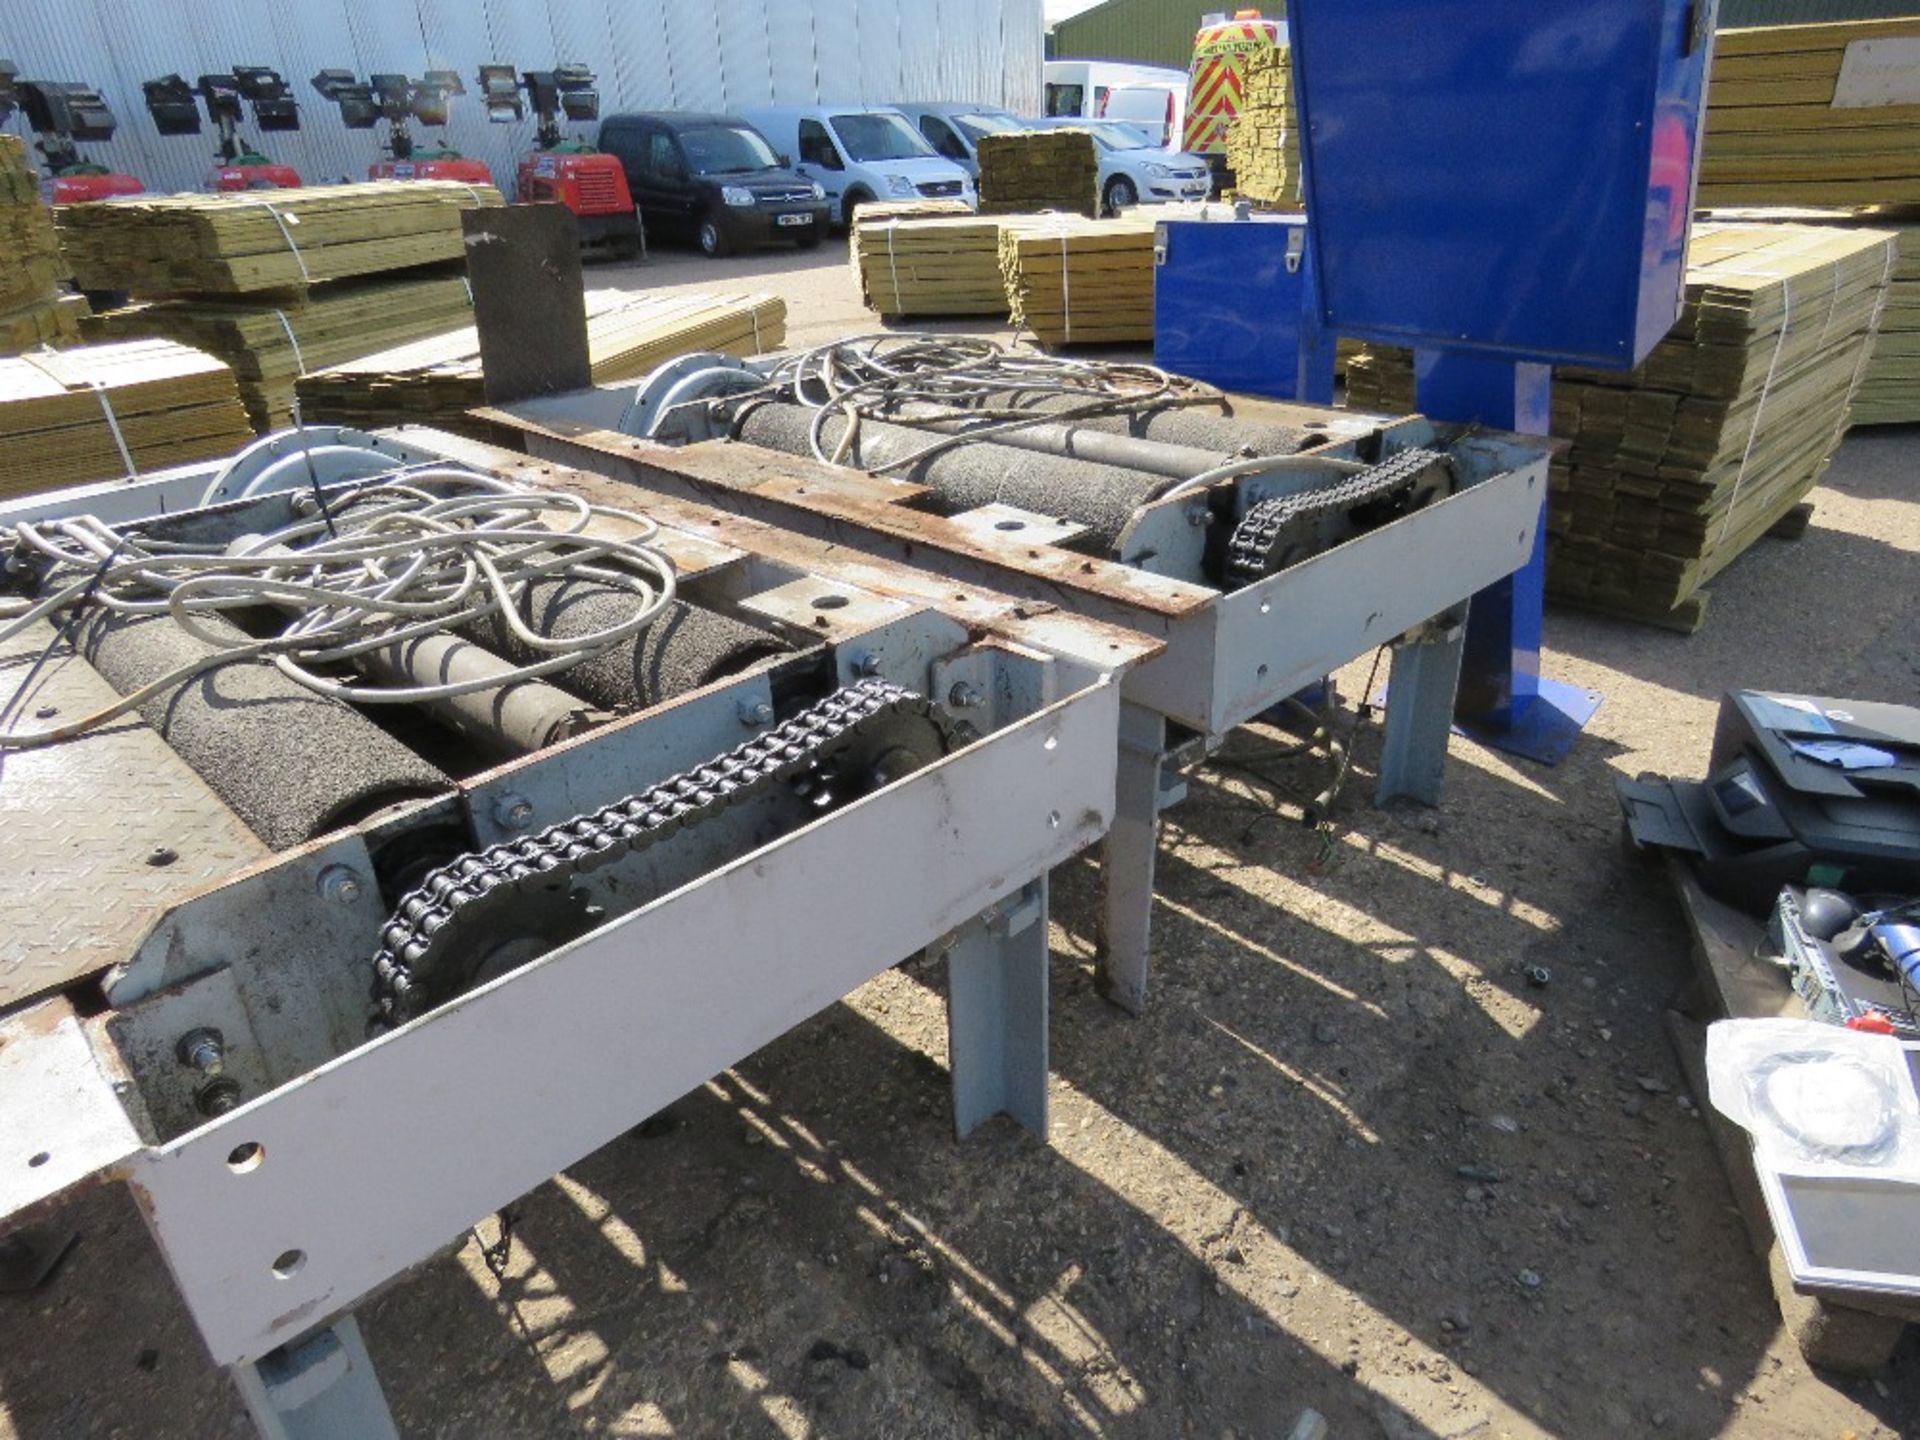 SET OF COMMERCIAL VEHICLE BRAKE TEST ROLLERS PLUS ASSOCITED EQUIPMENT, EX COMPANY LIQUIDATION - Image 5 of 7